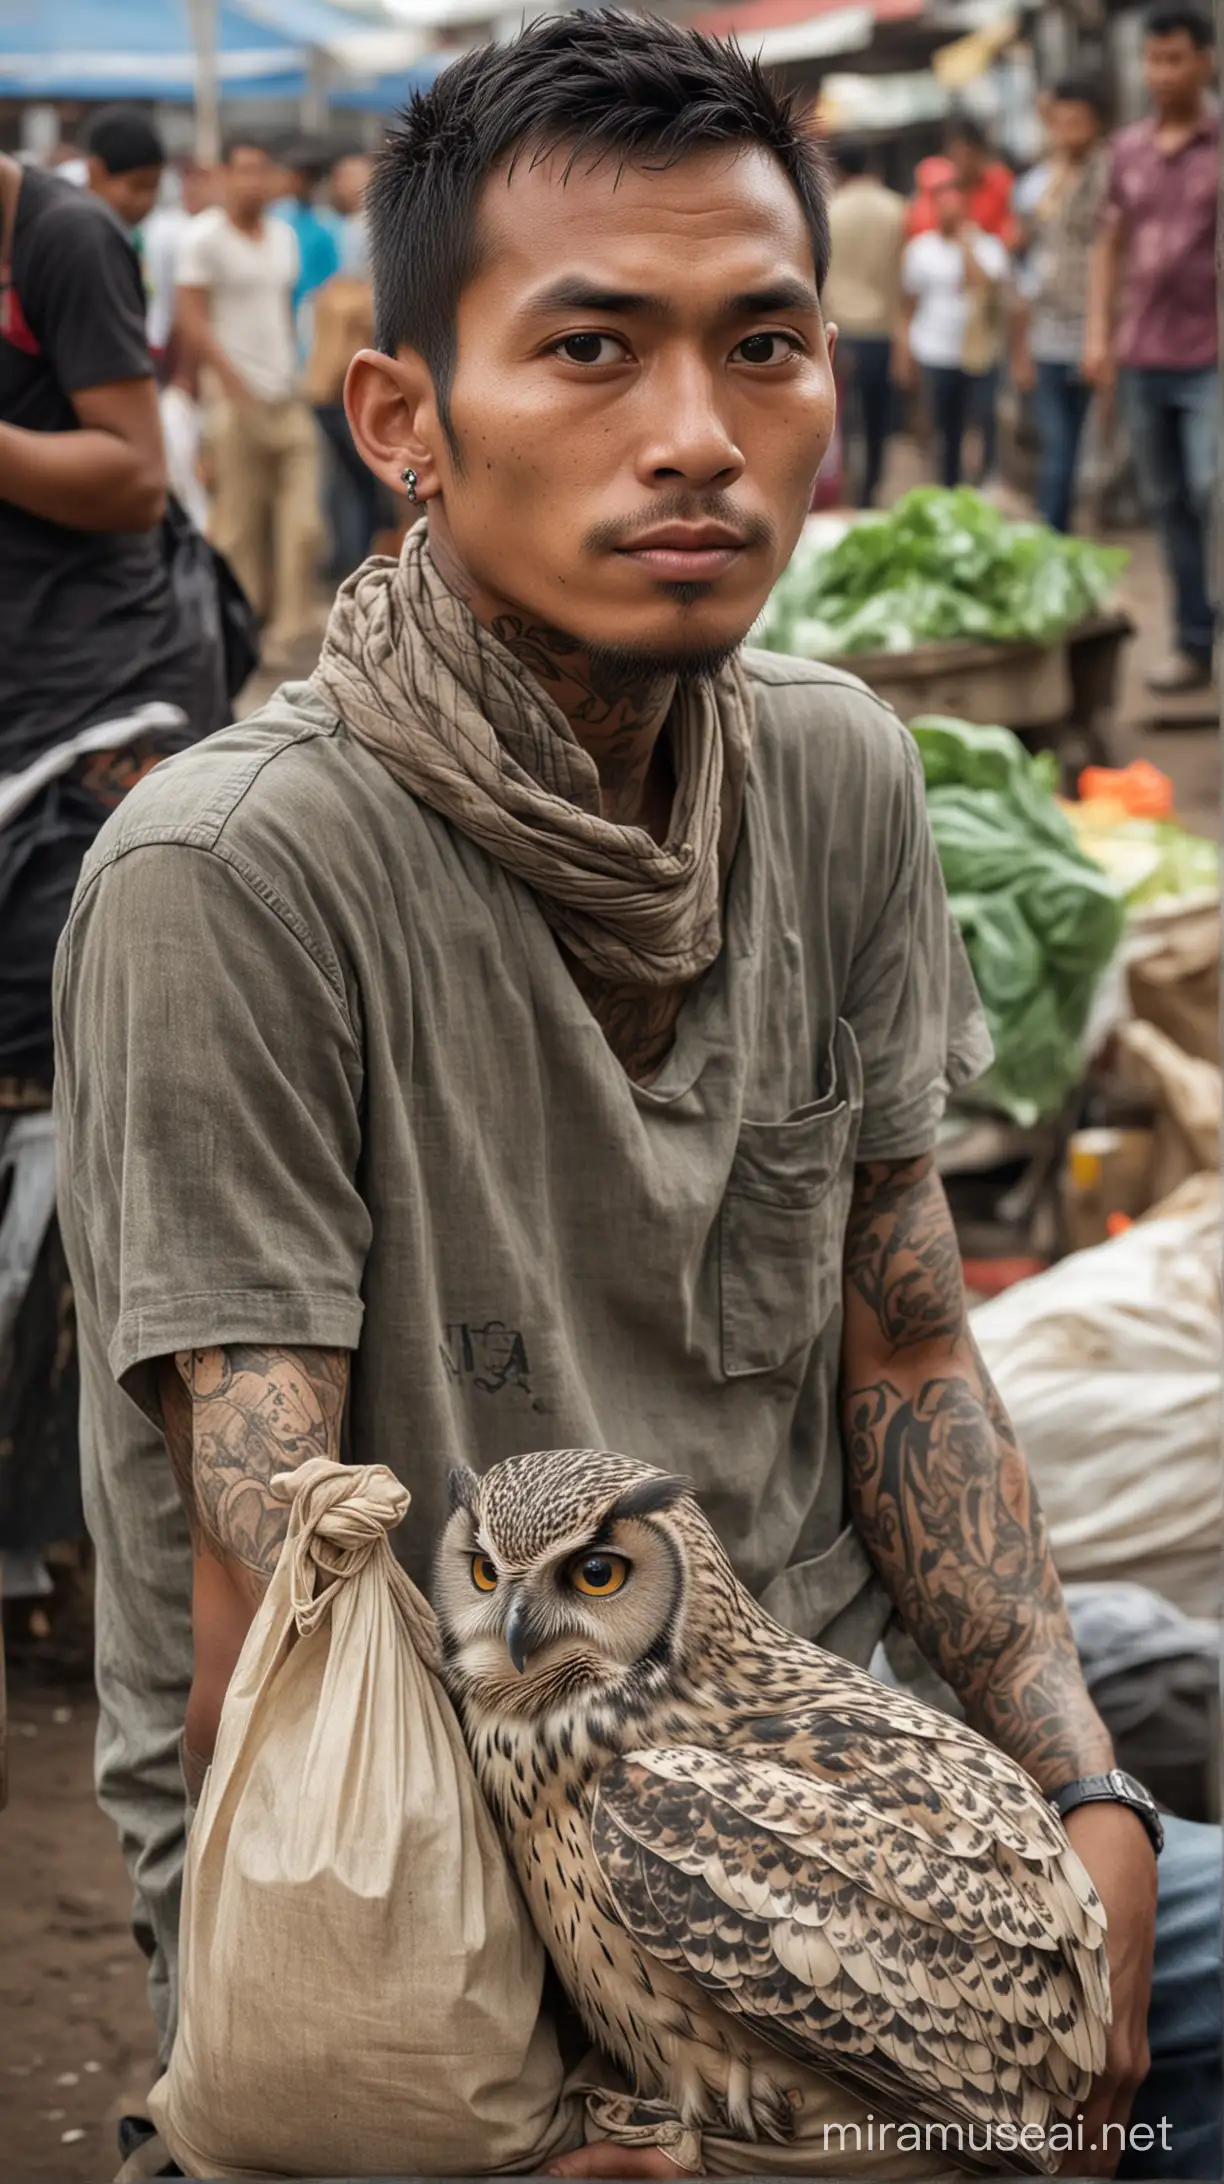 Indonesian Man with Owl Tattoo Selling in Crowded Market